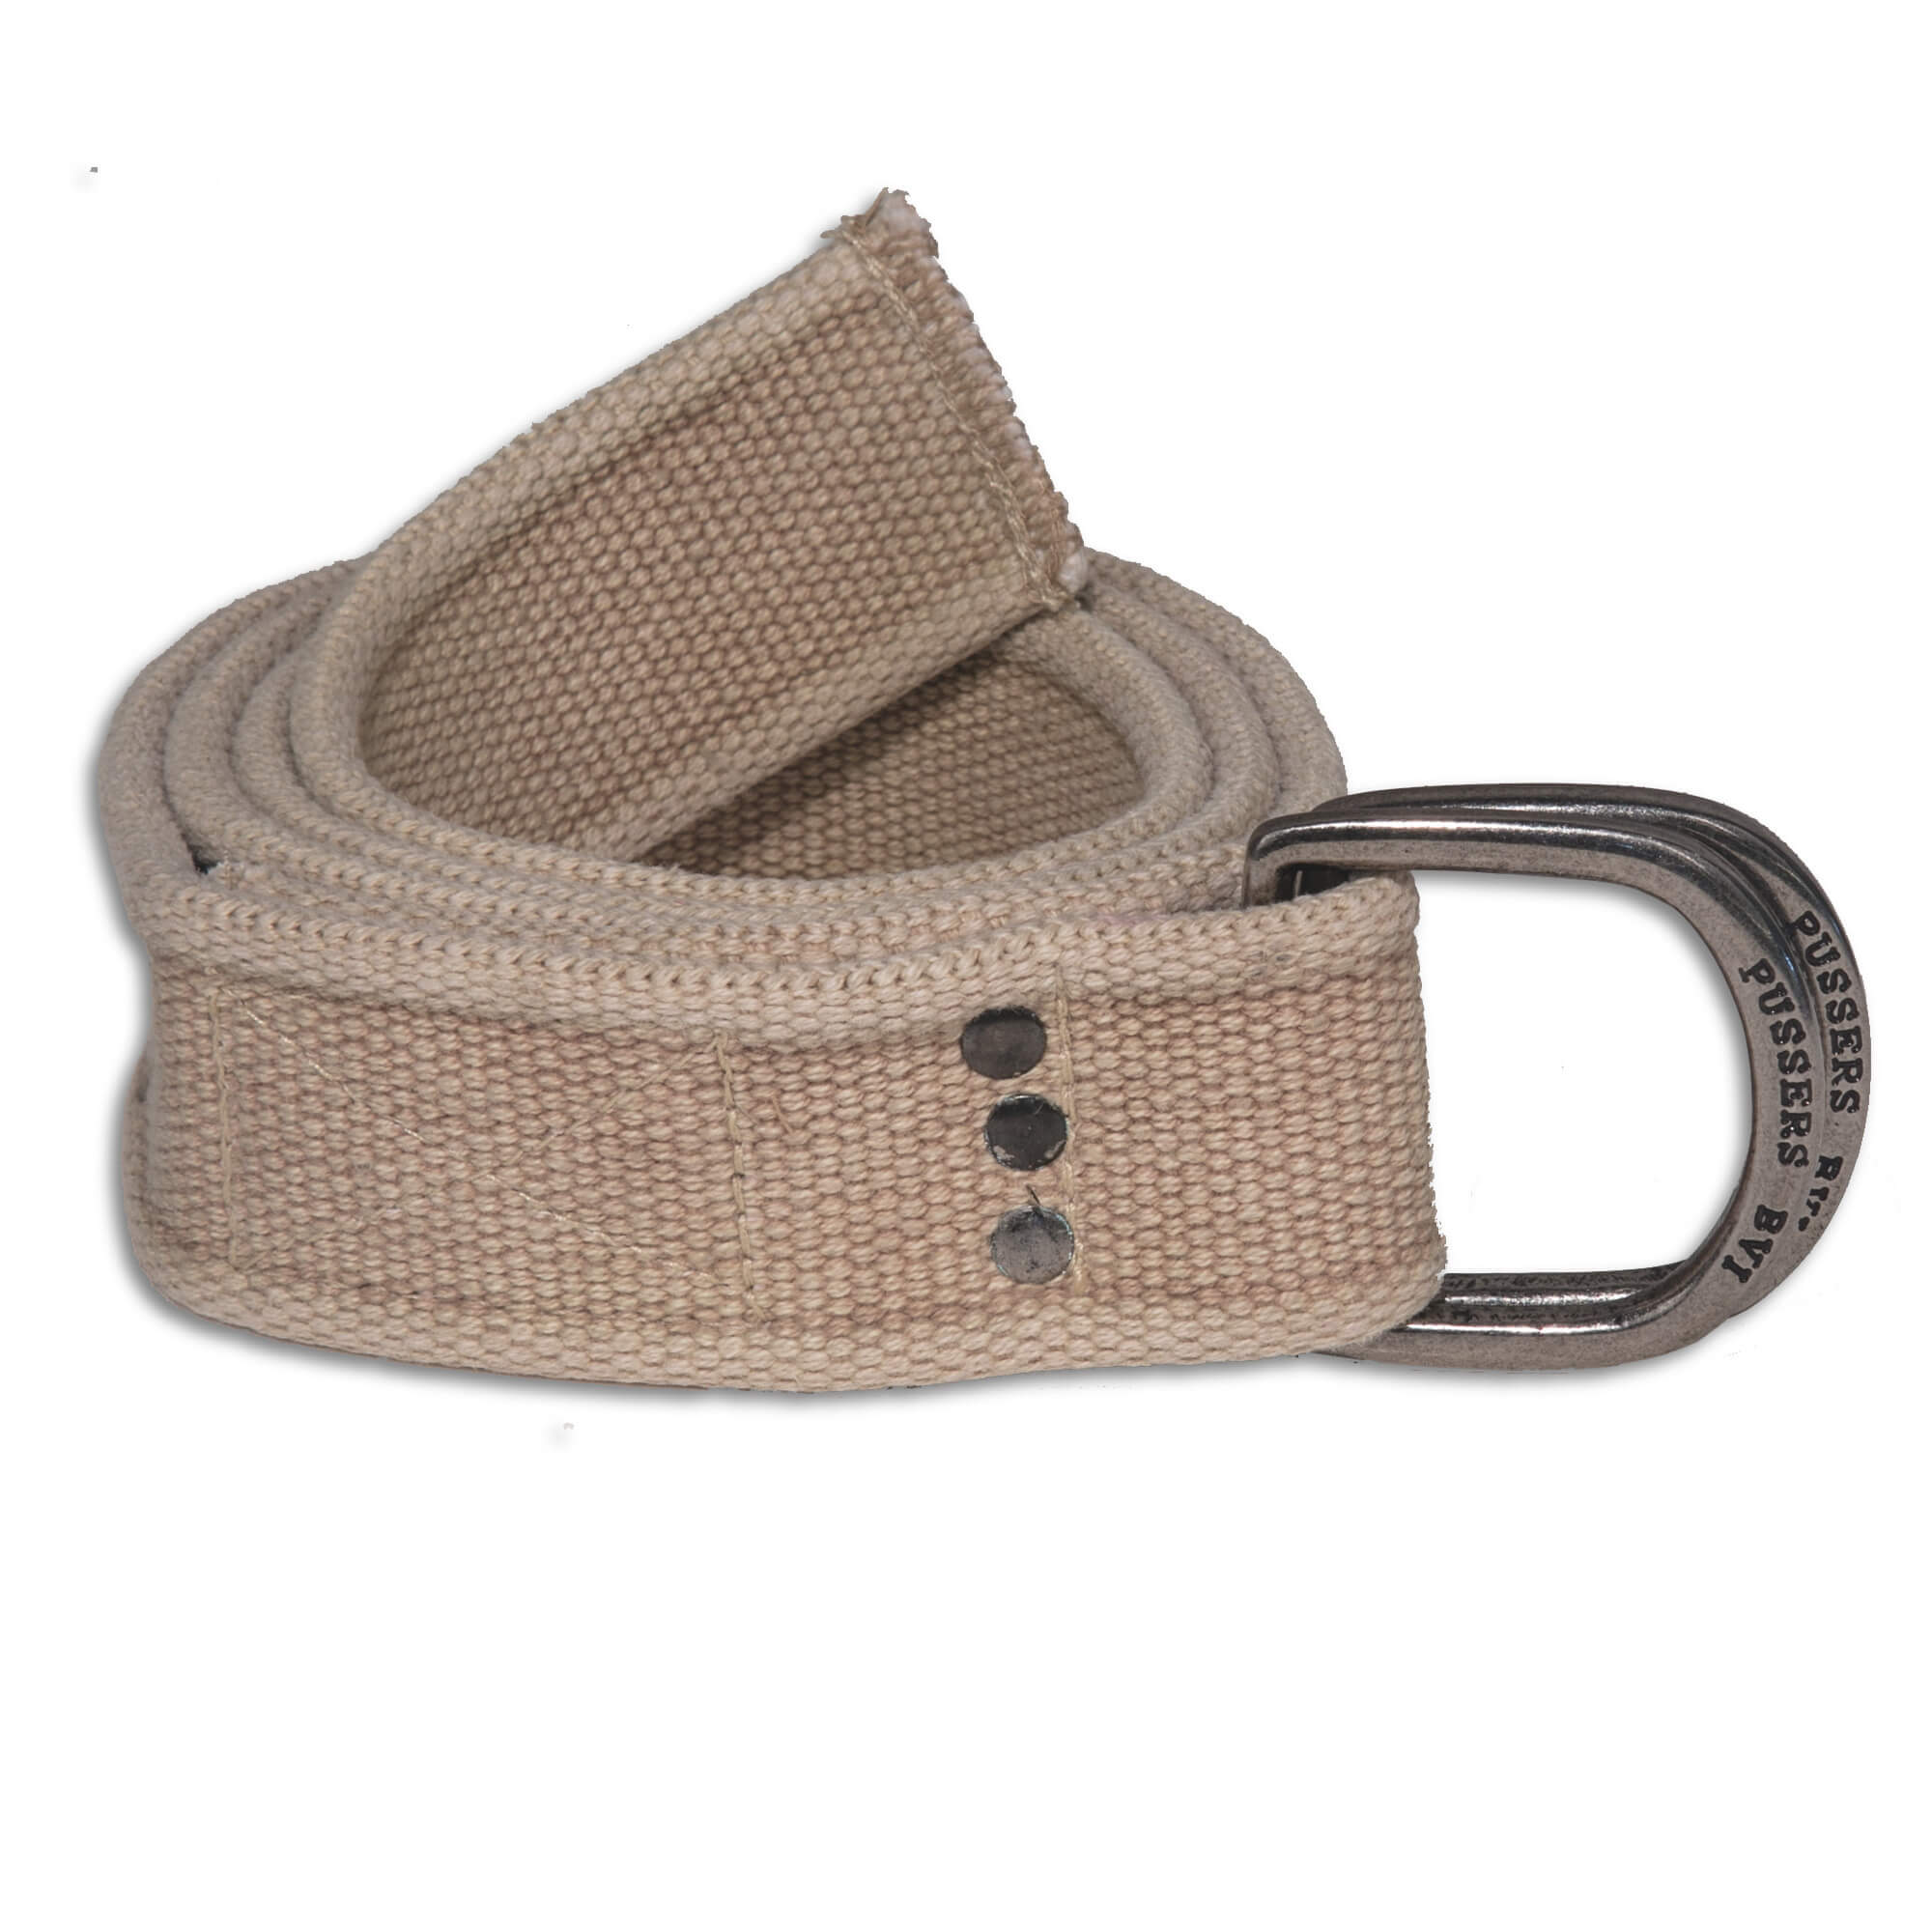 ITIEZY Men Canvas Web Belt Black D-ring Buckle Military 1 1/2 Fathers Day Gifts 